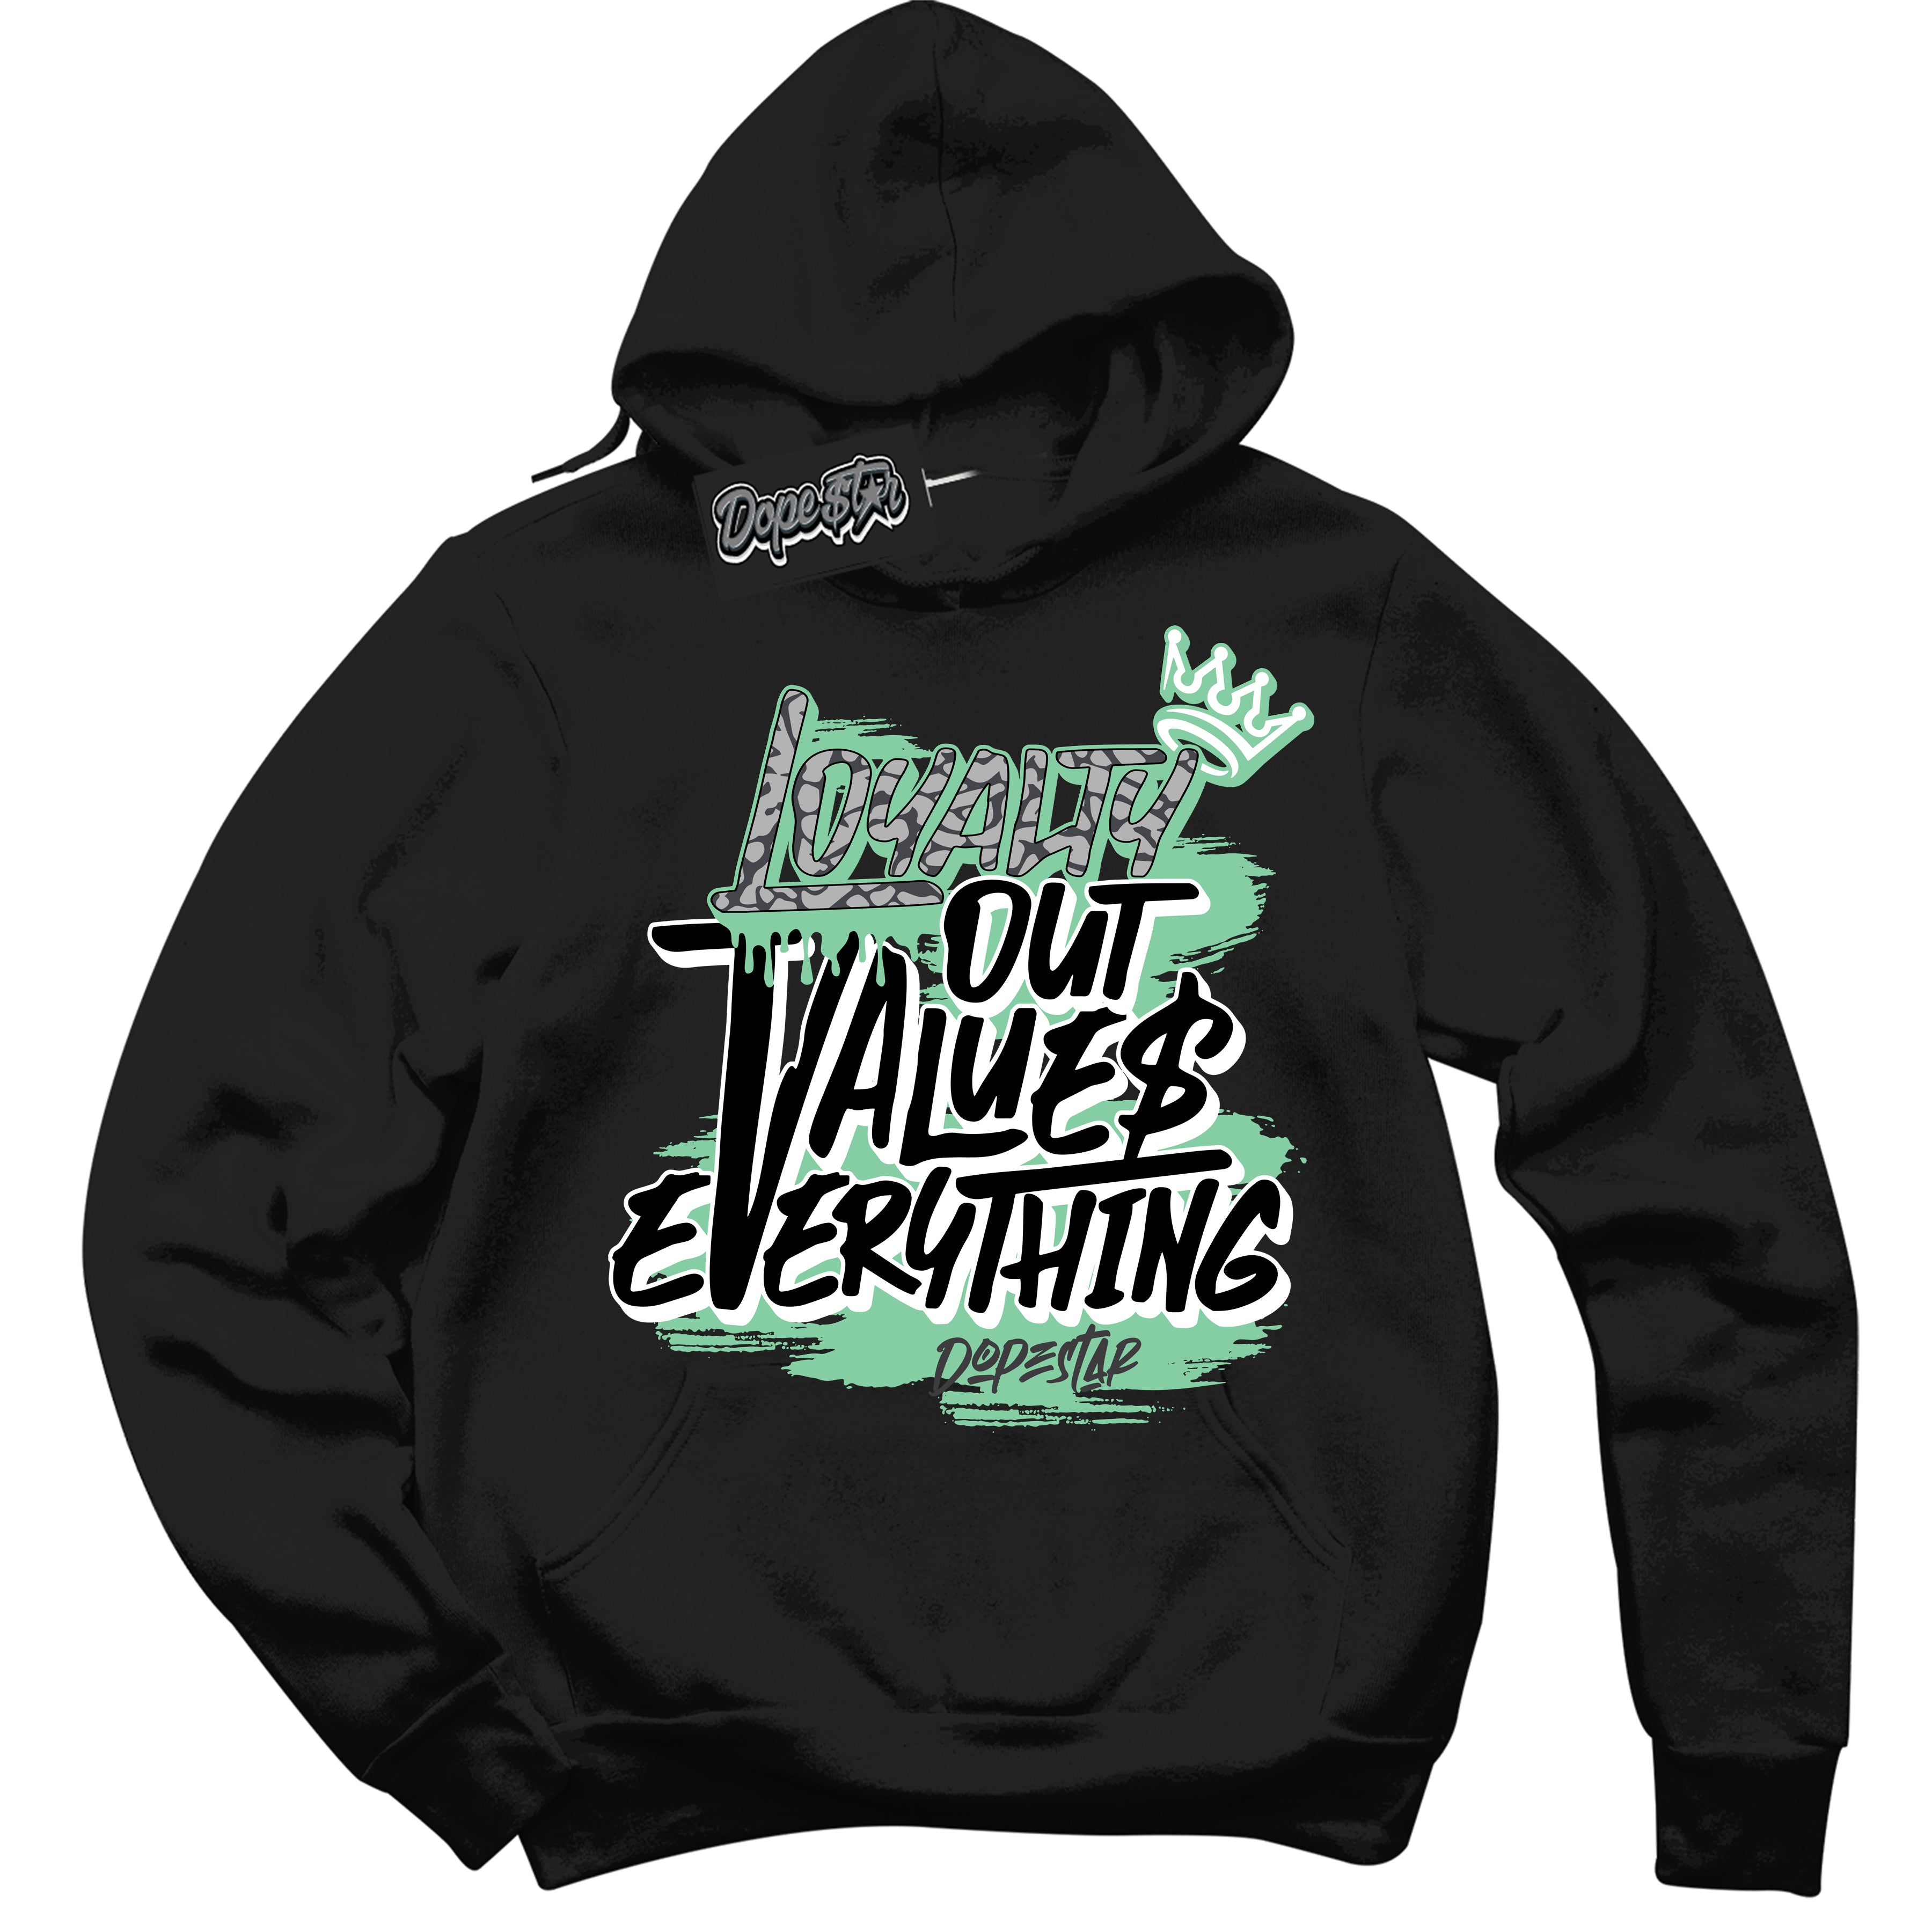 Cool Black Hoodie with “ Loyalty Out Values Everything ”  design that Perfectly Matches  Green Glow 3s Sneakers.